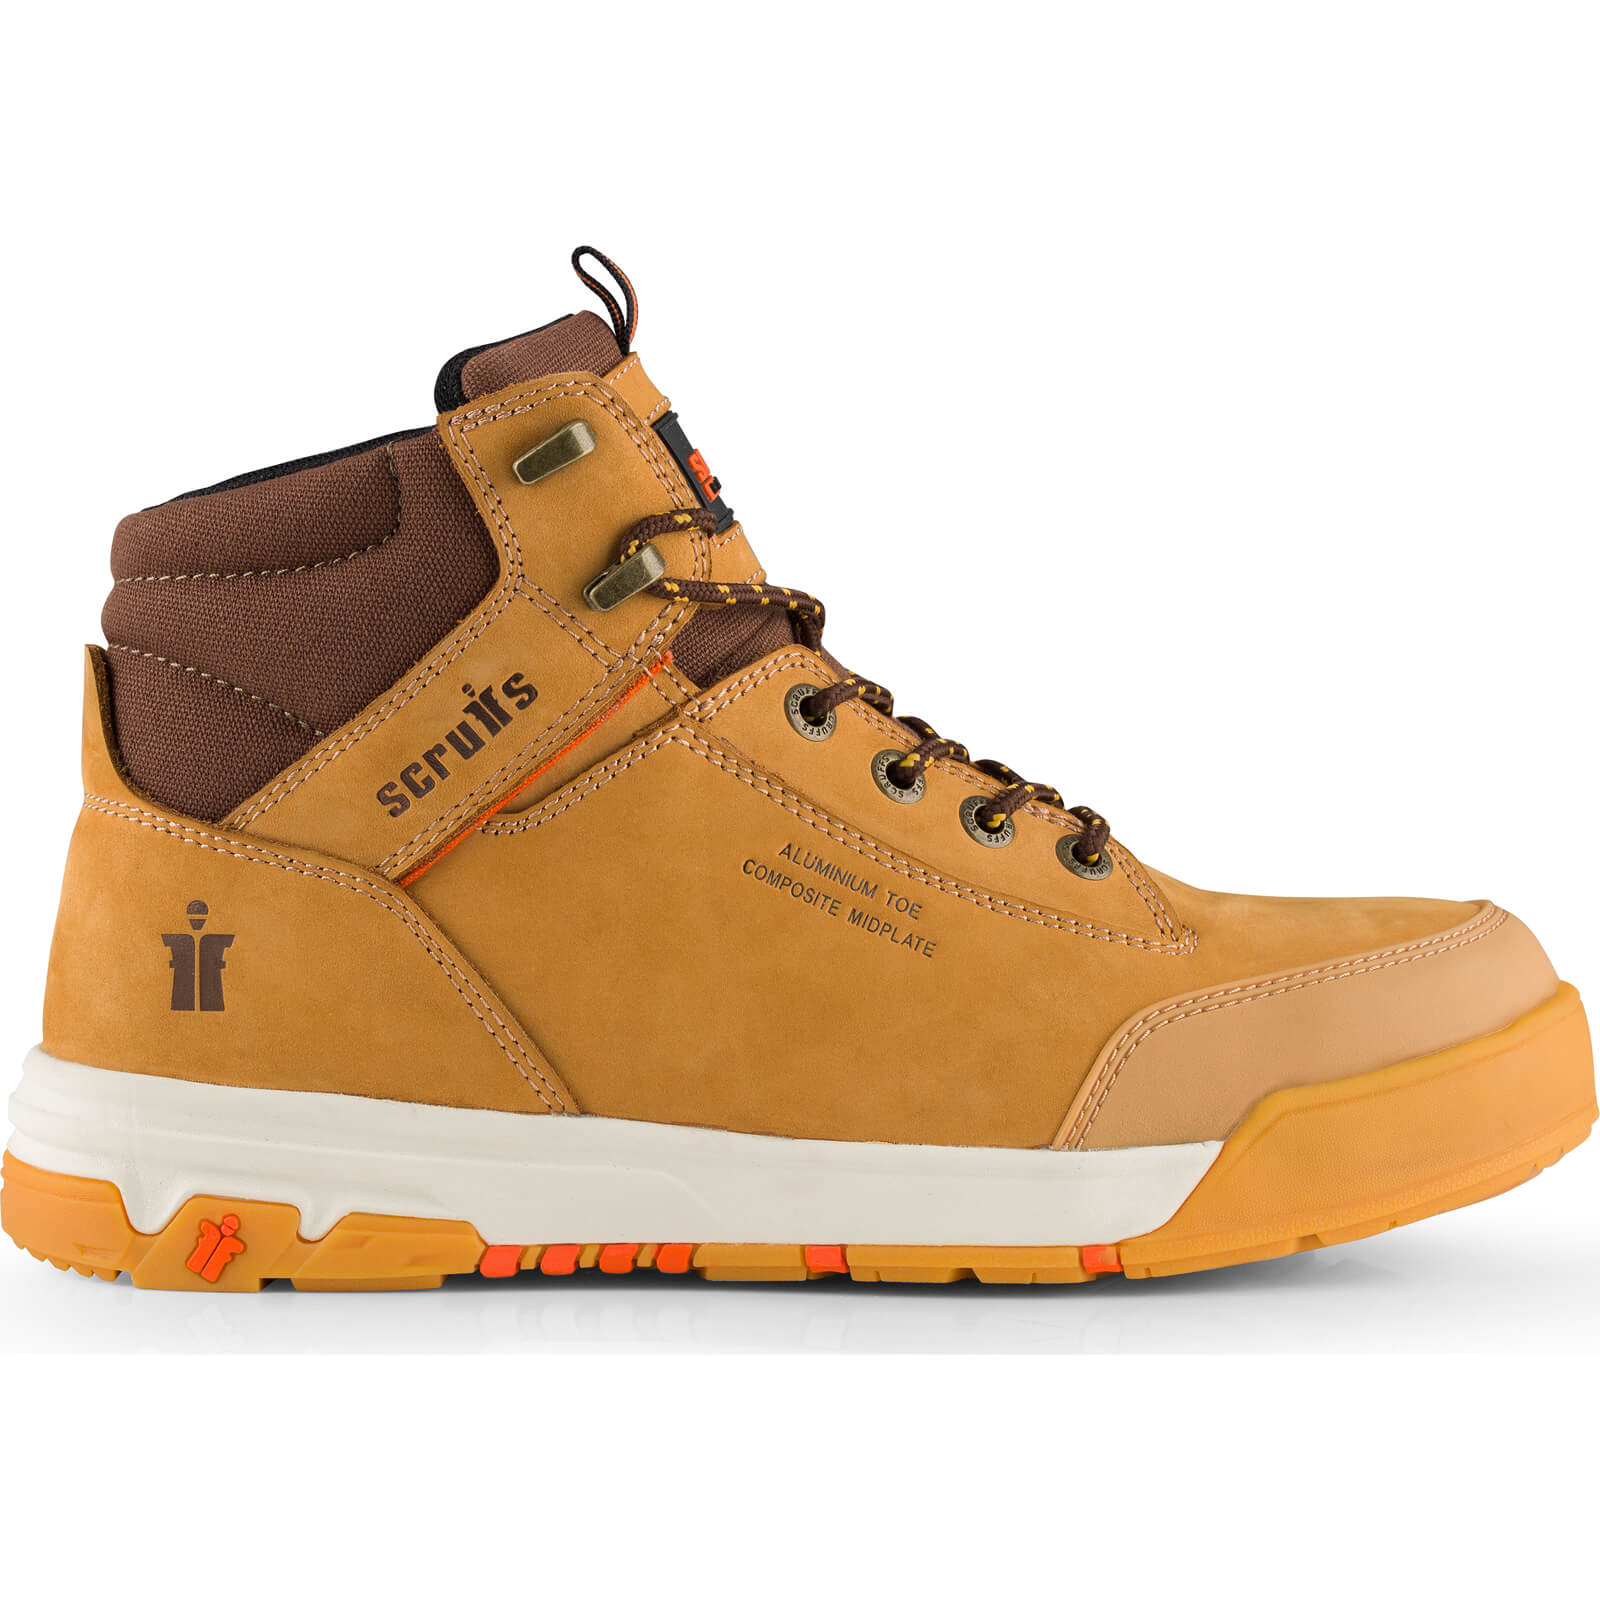 Image of Scruffs Switchback 3 Work Boot Tan Size 12